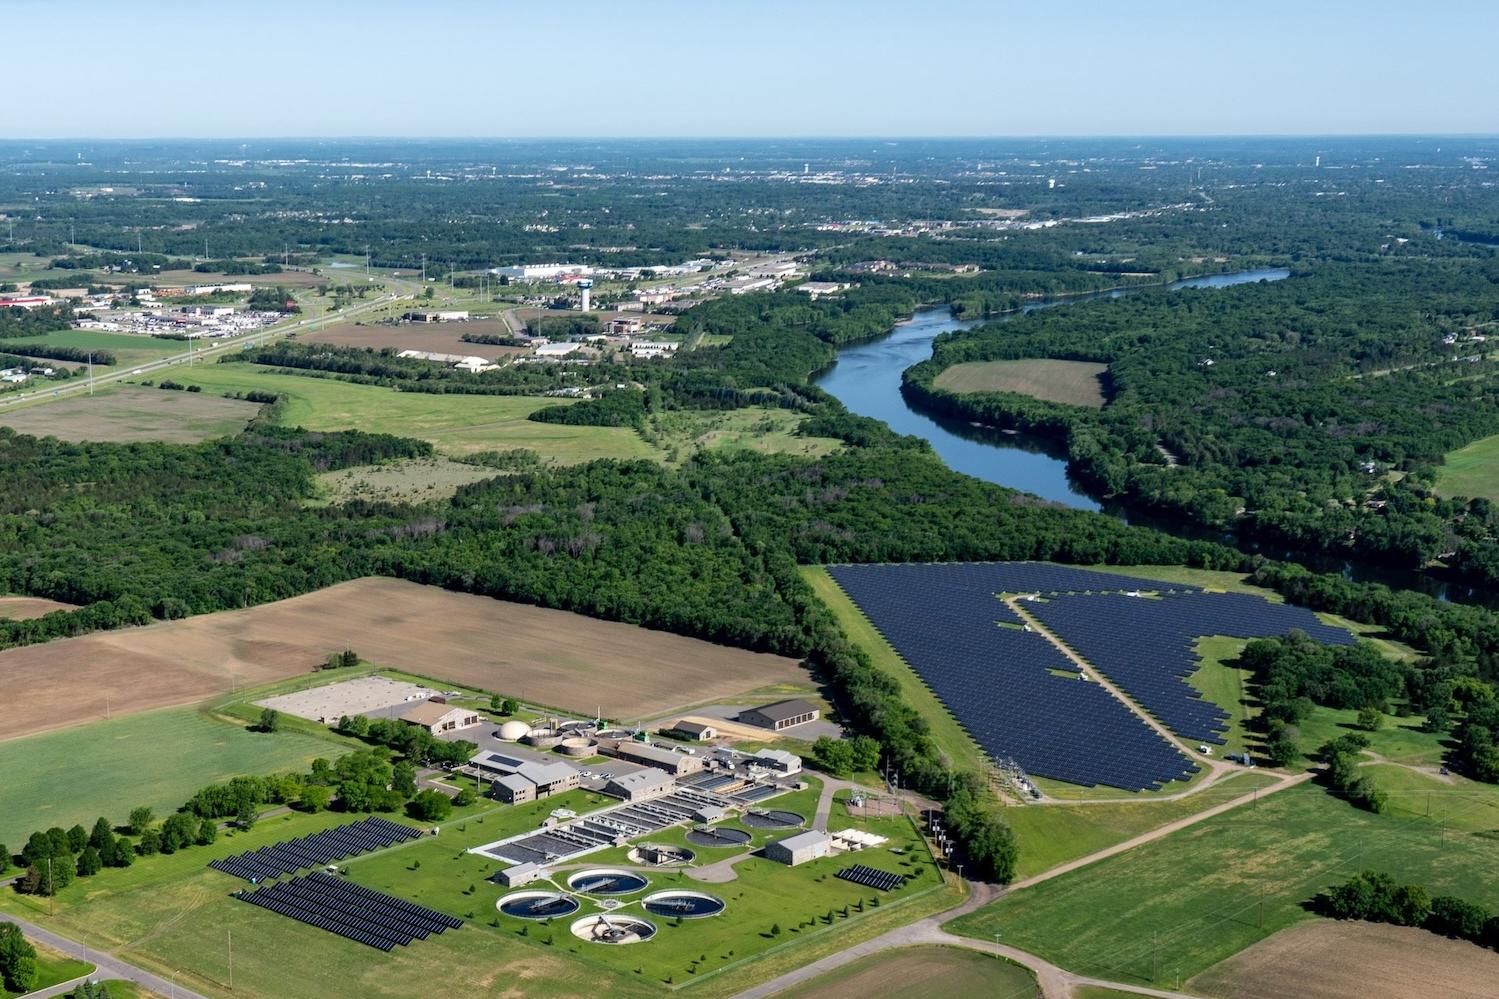 st cloud minnesota wastewater treatment plant aerial view - it will create green hydrogen with electrolysis